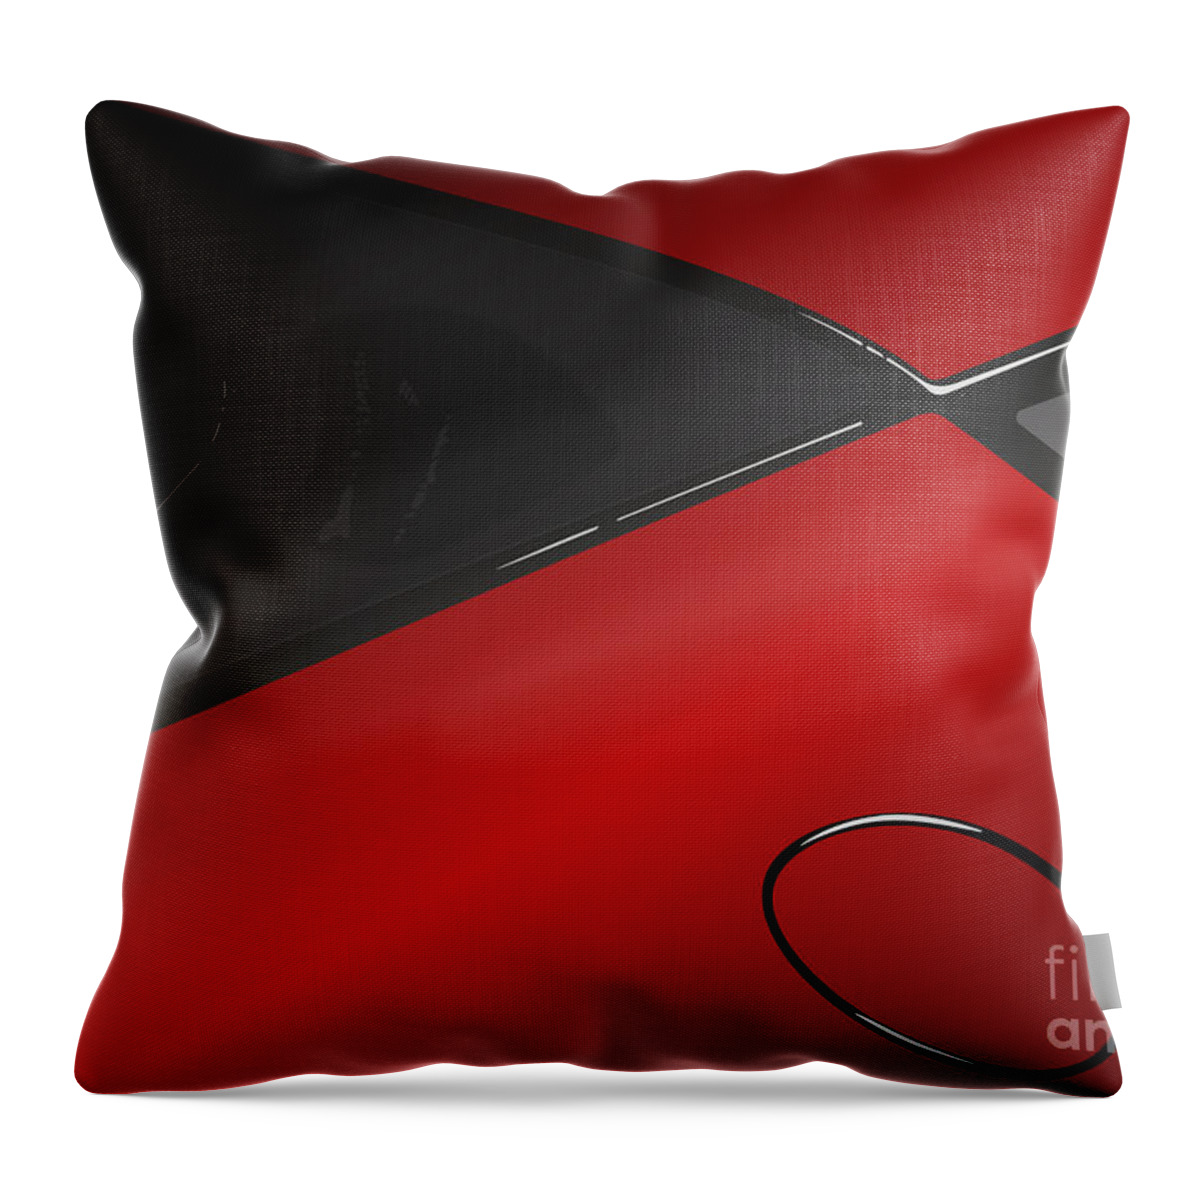 Sports Car Throw Pillow featuring the digital art Evora X Design Great British Sports Cars - Red by Moospeed Art